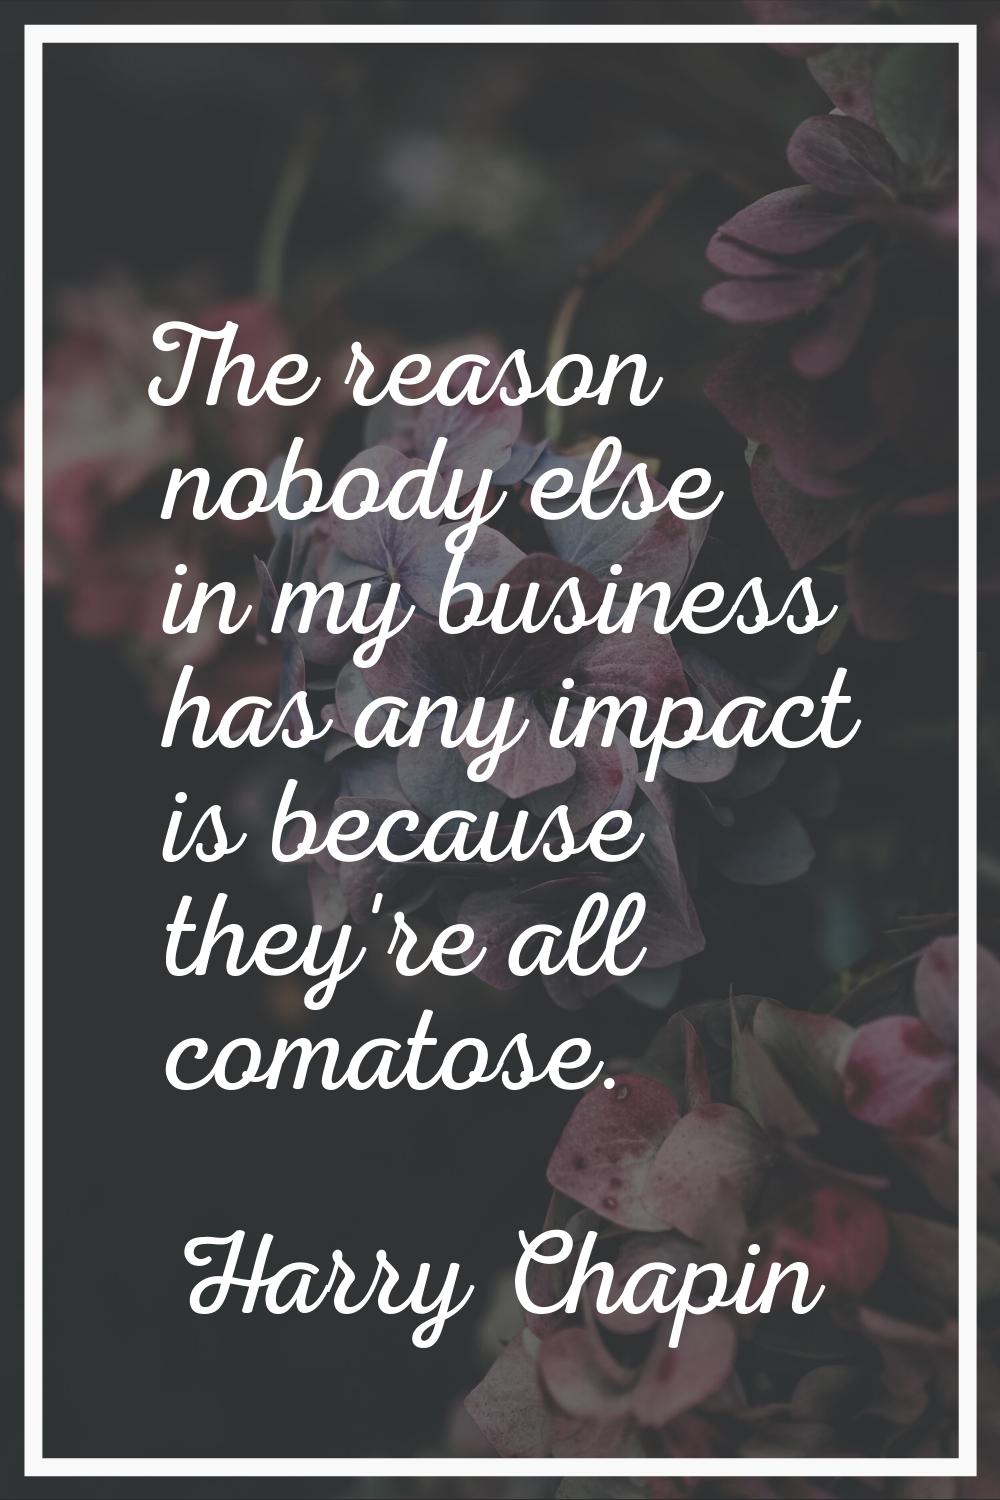 The reason nobody else in my business has any impact is because they're all comatose.